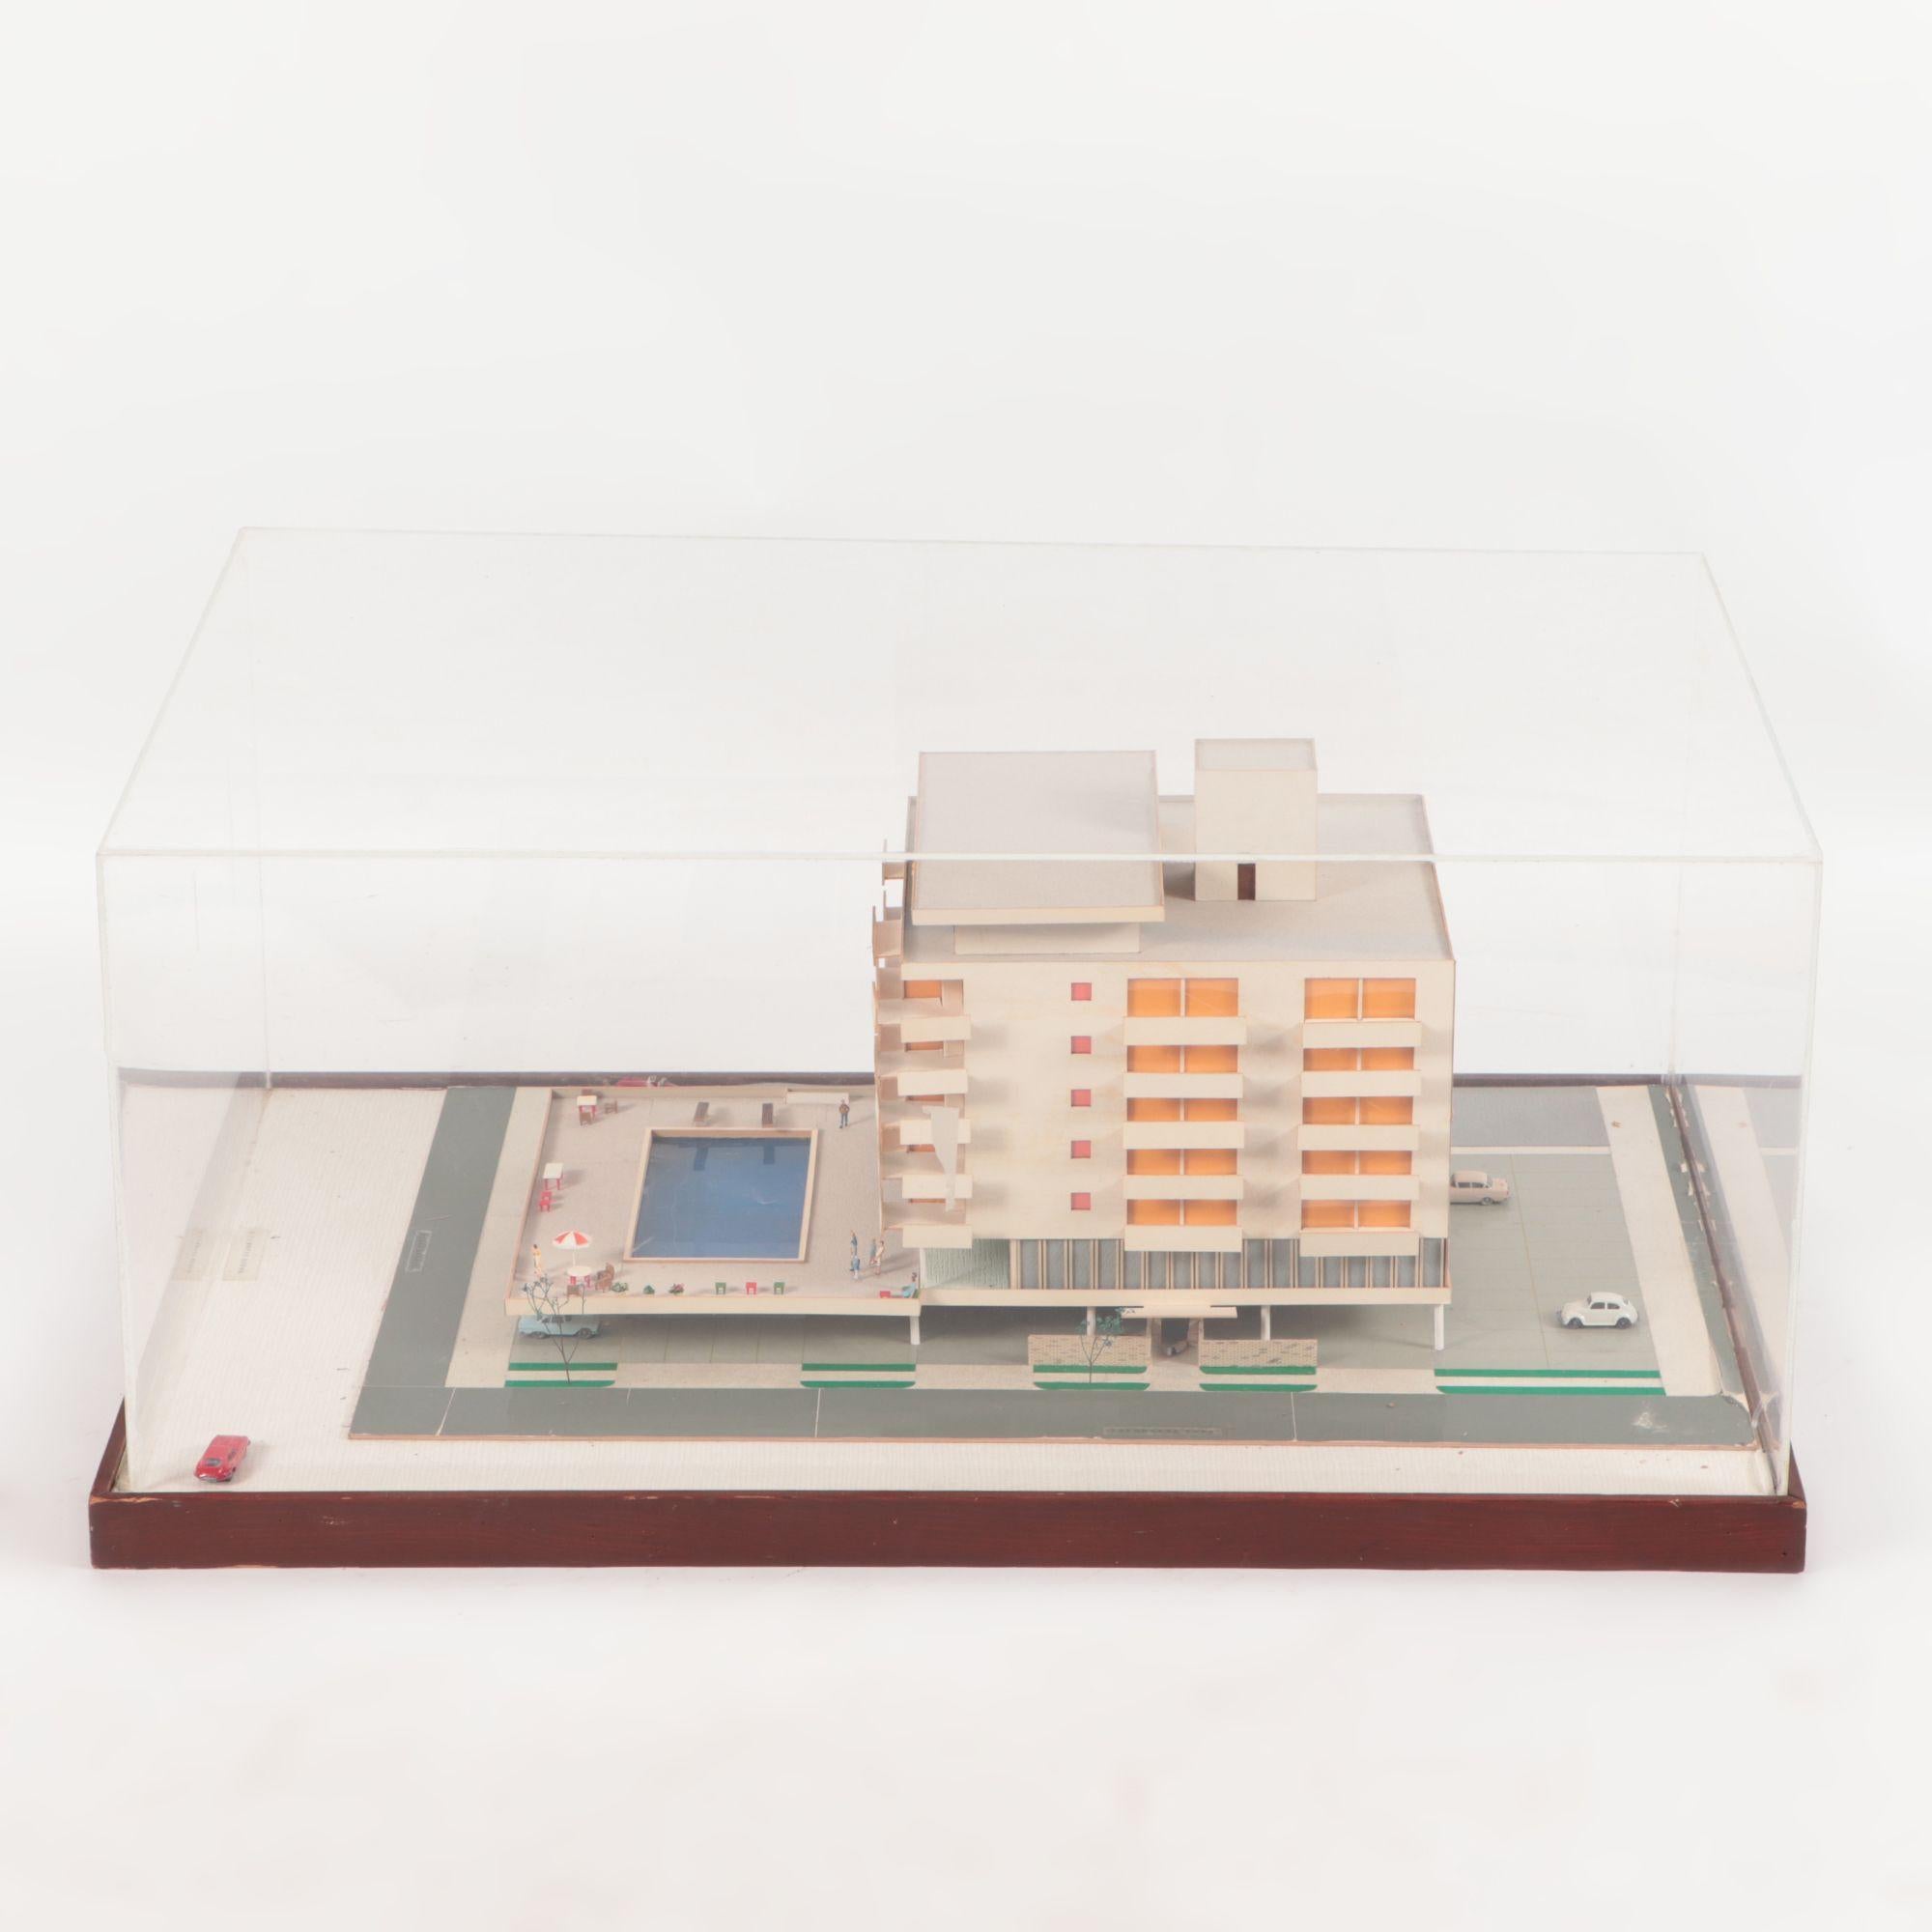 A very cool Mid-Century Modern Architectural Model of an Atlantic City hotel, incredible detail, housed in lucite box, circa 1960.